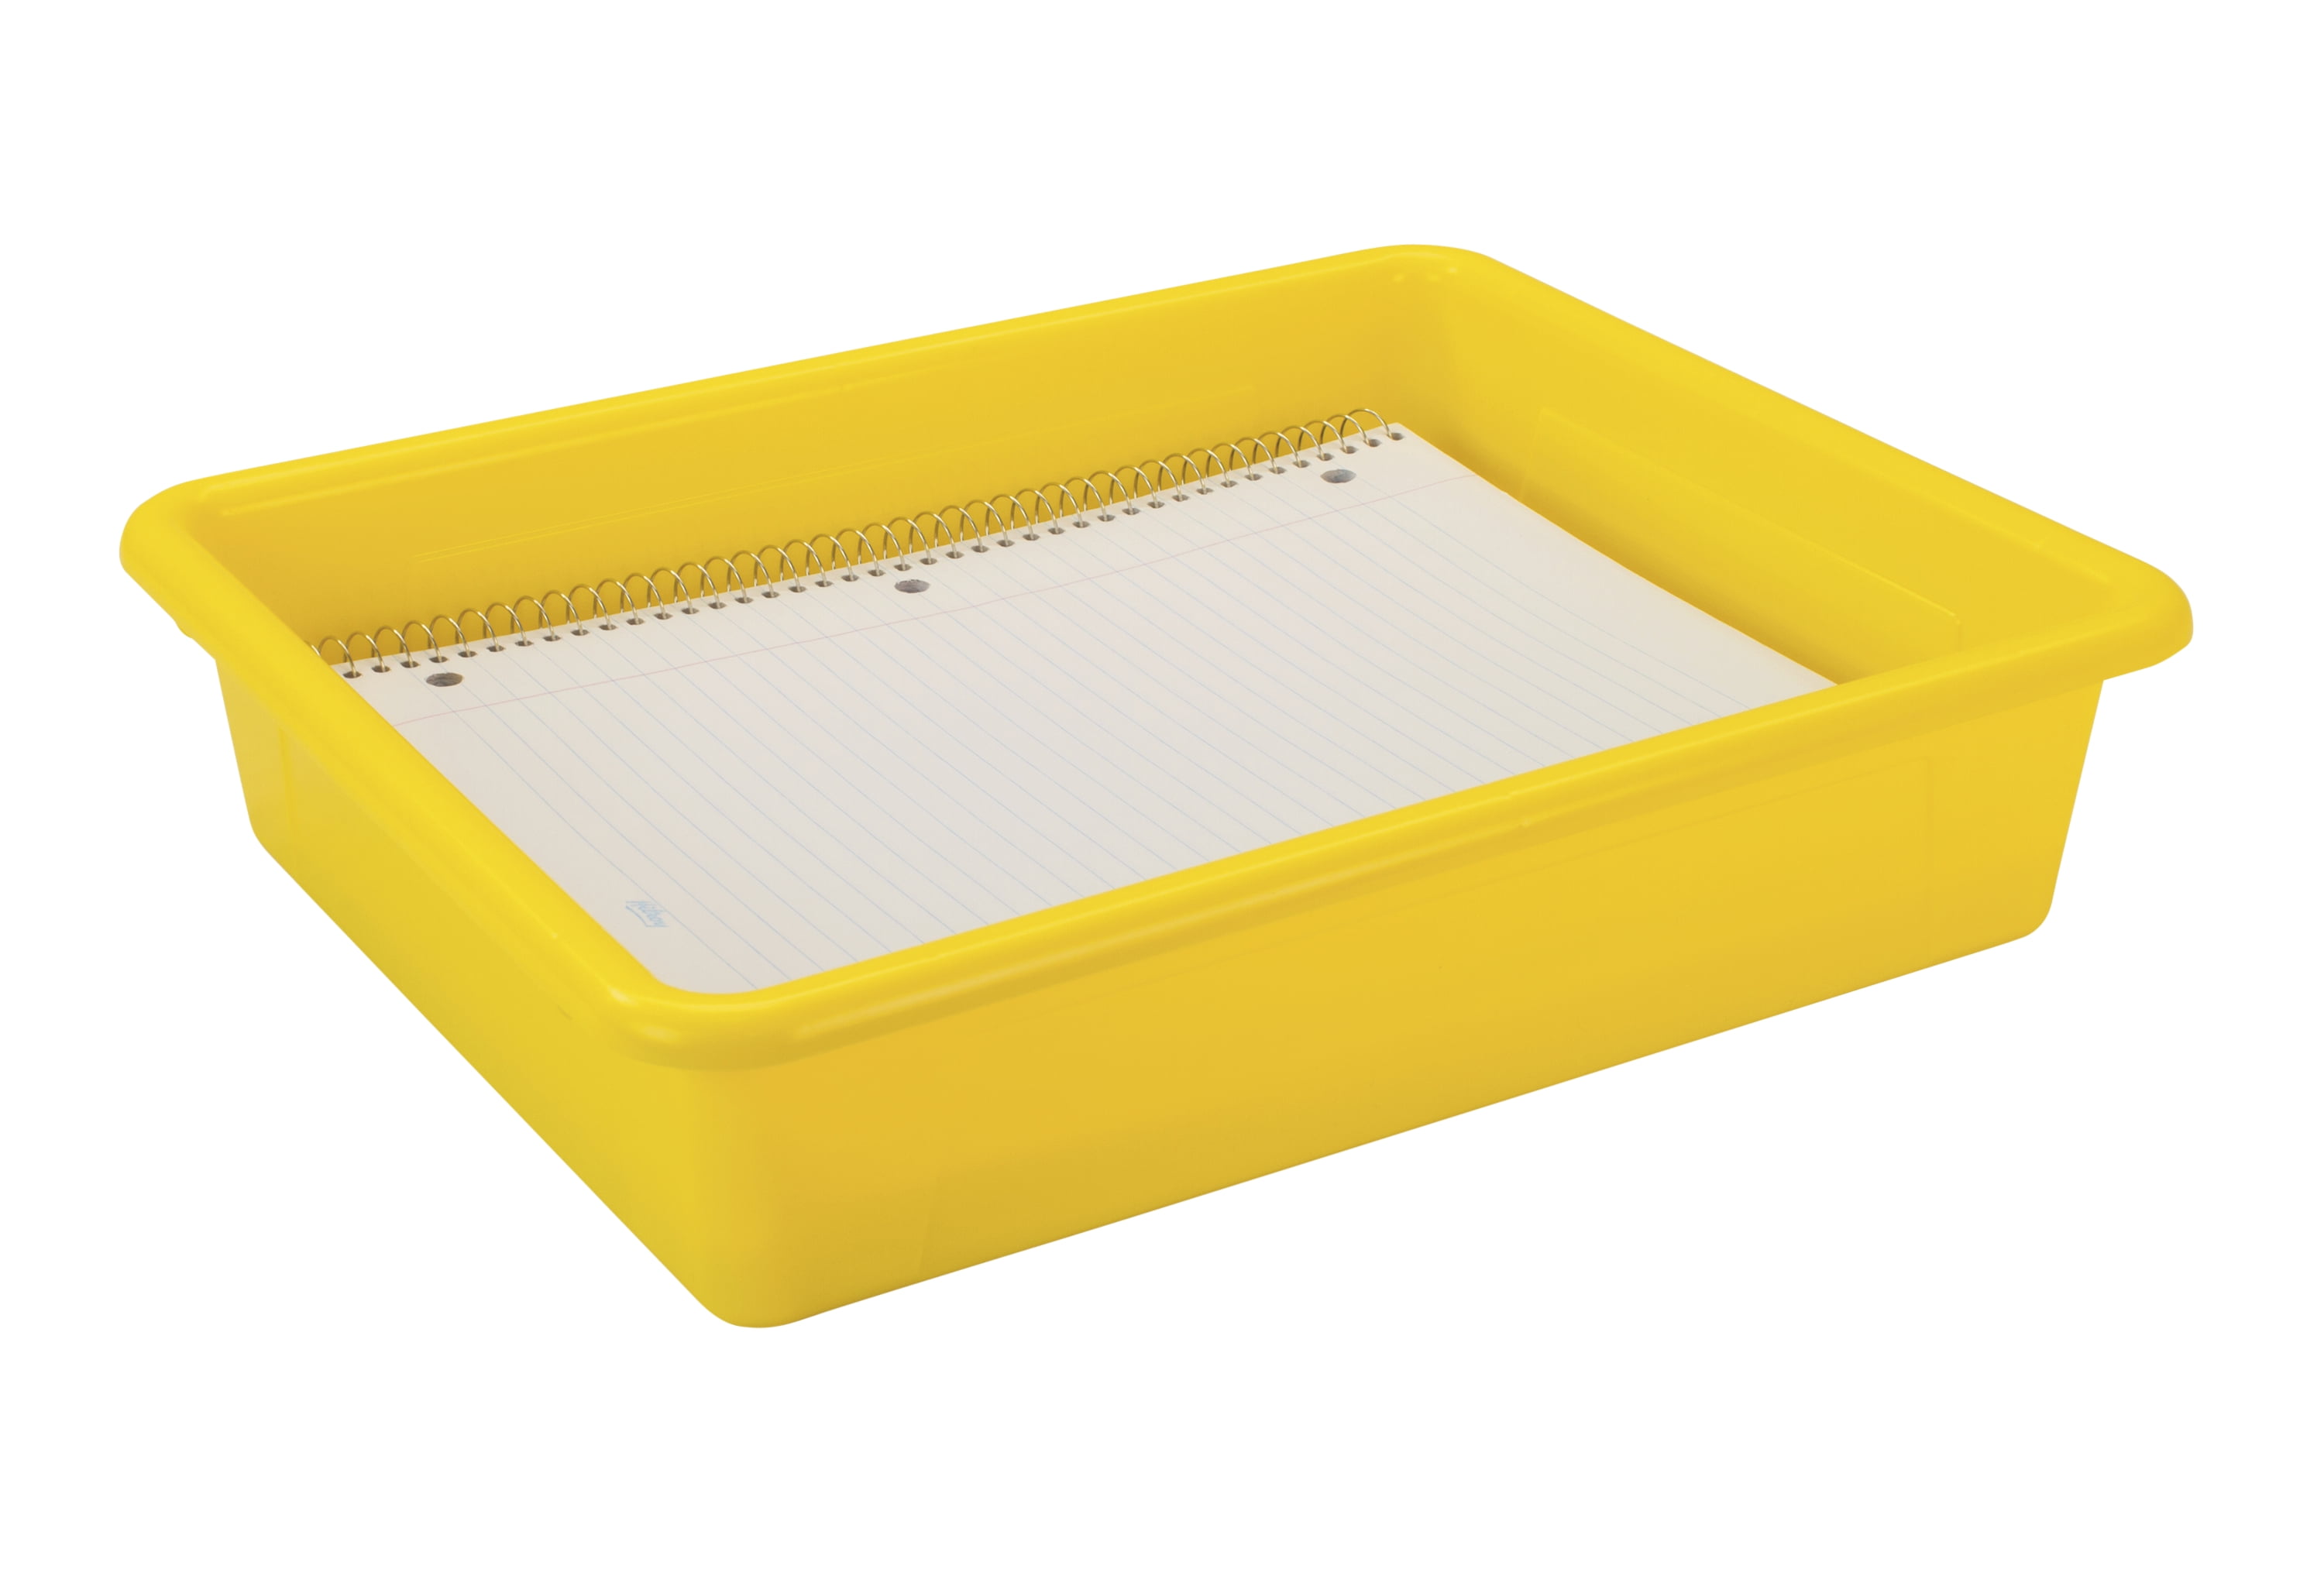 Storage Tray, Letter size, 10-3/4 x 13-1/4 x 3 Inches, Assorted Colors, Pack of 5 School Smart